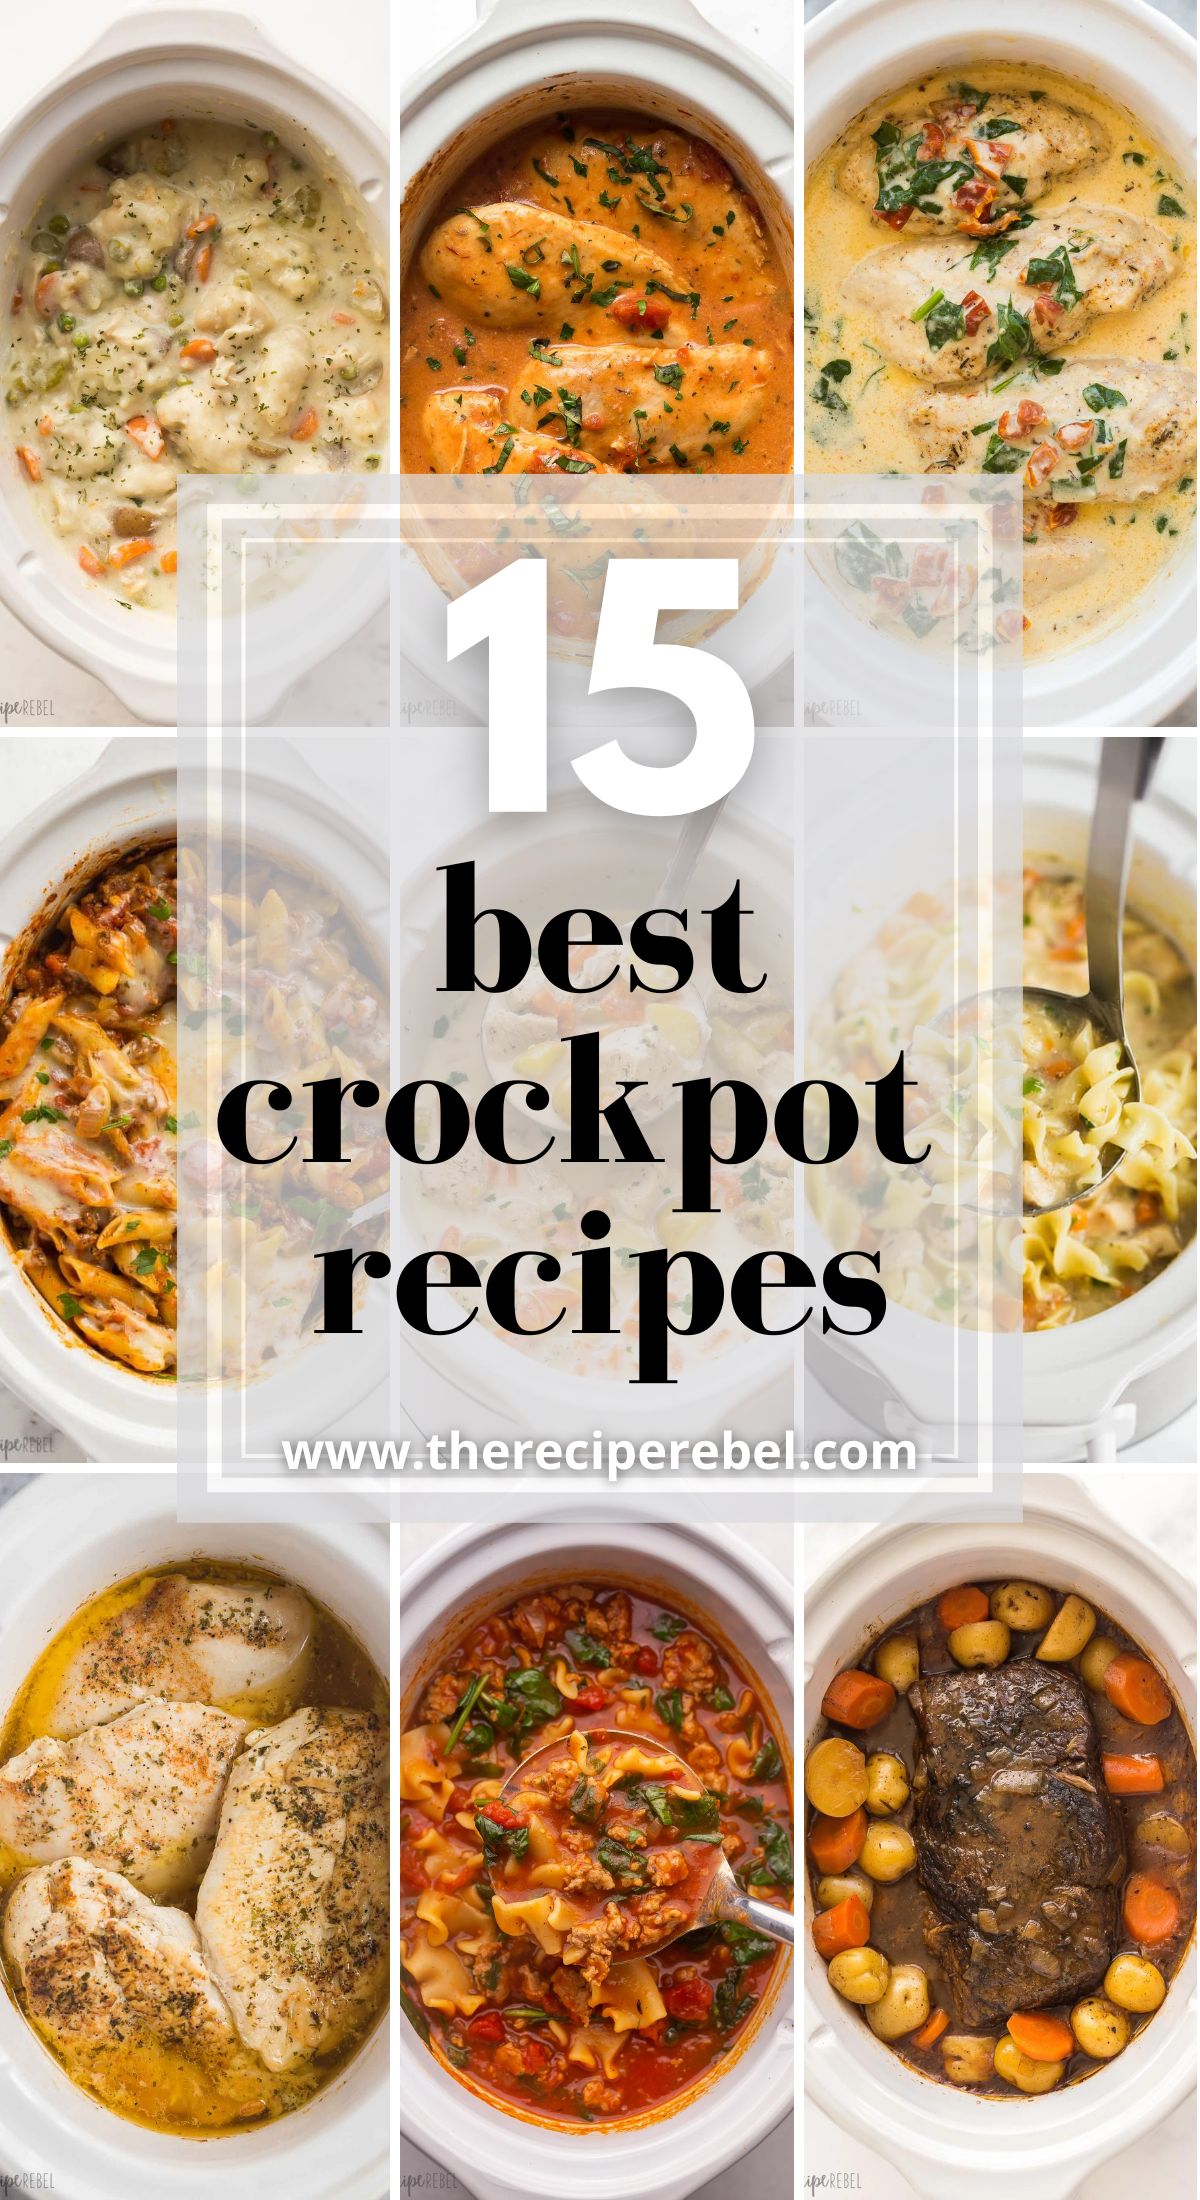 nine image collage of the best crockpot recipes with title.